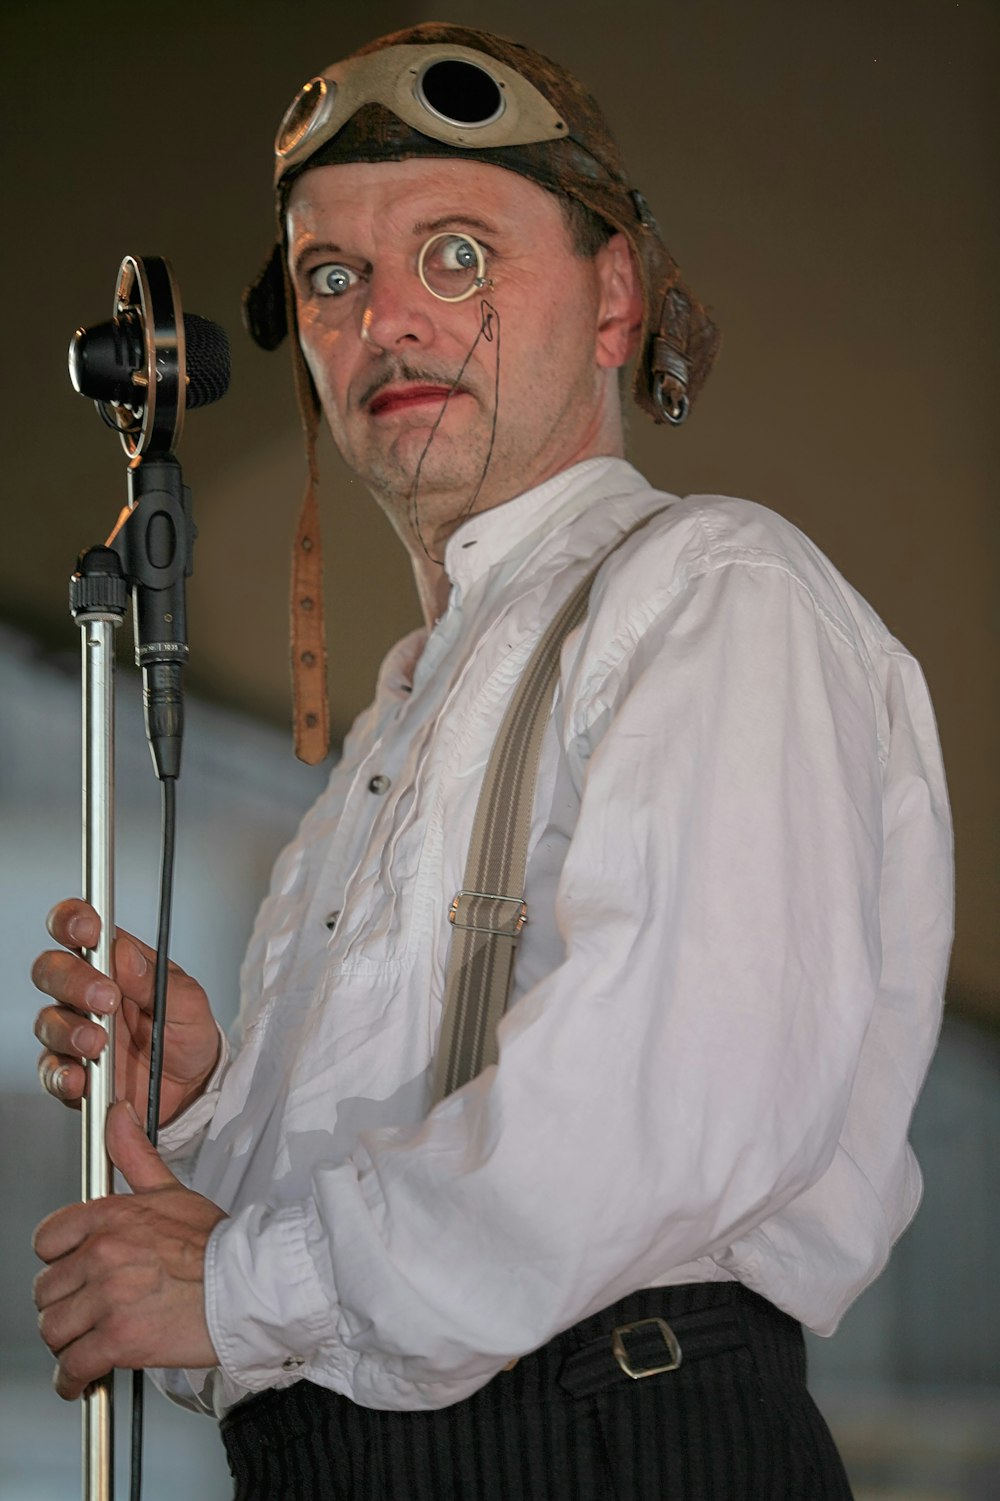 a man wearing a hat and suspenders holding a stick